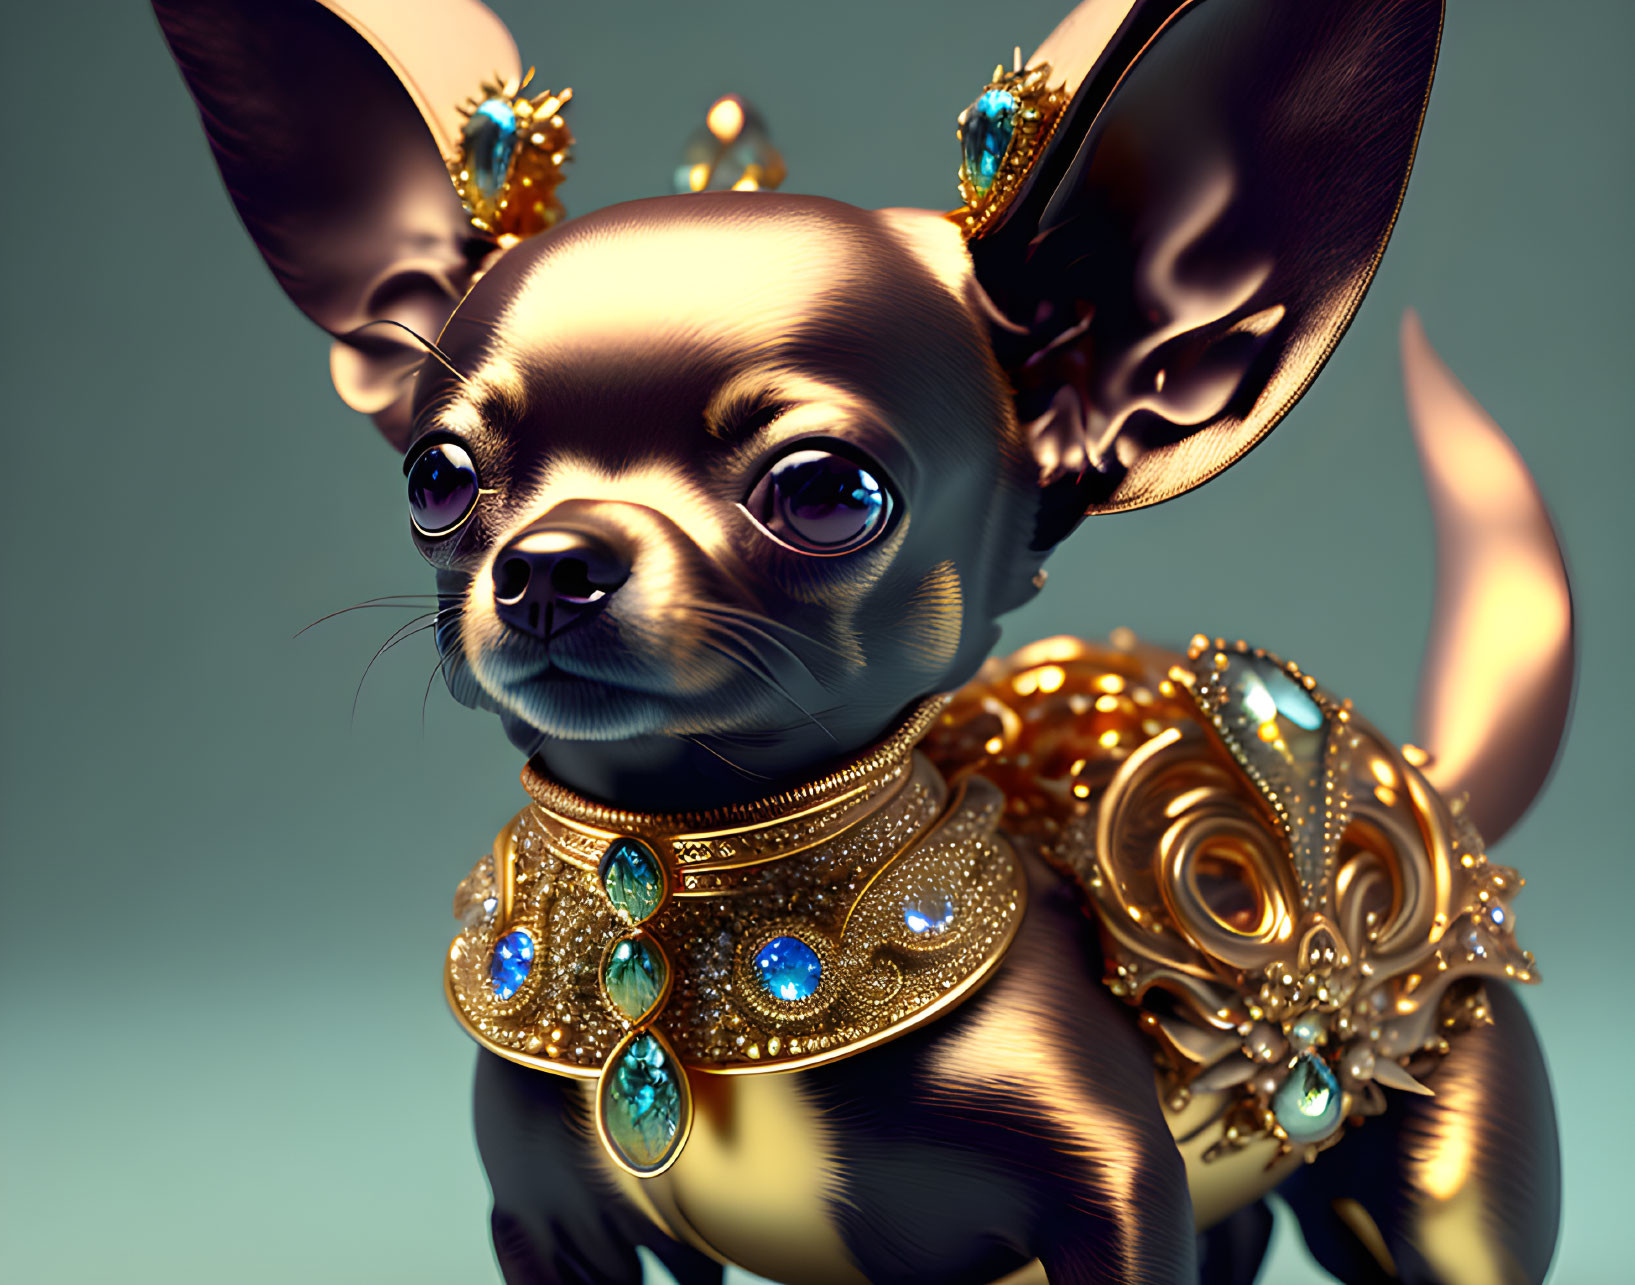 Golden, Gem-Studded Royal Attire on Fantasy Chihuahua against Teal Background